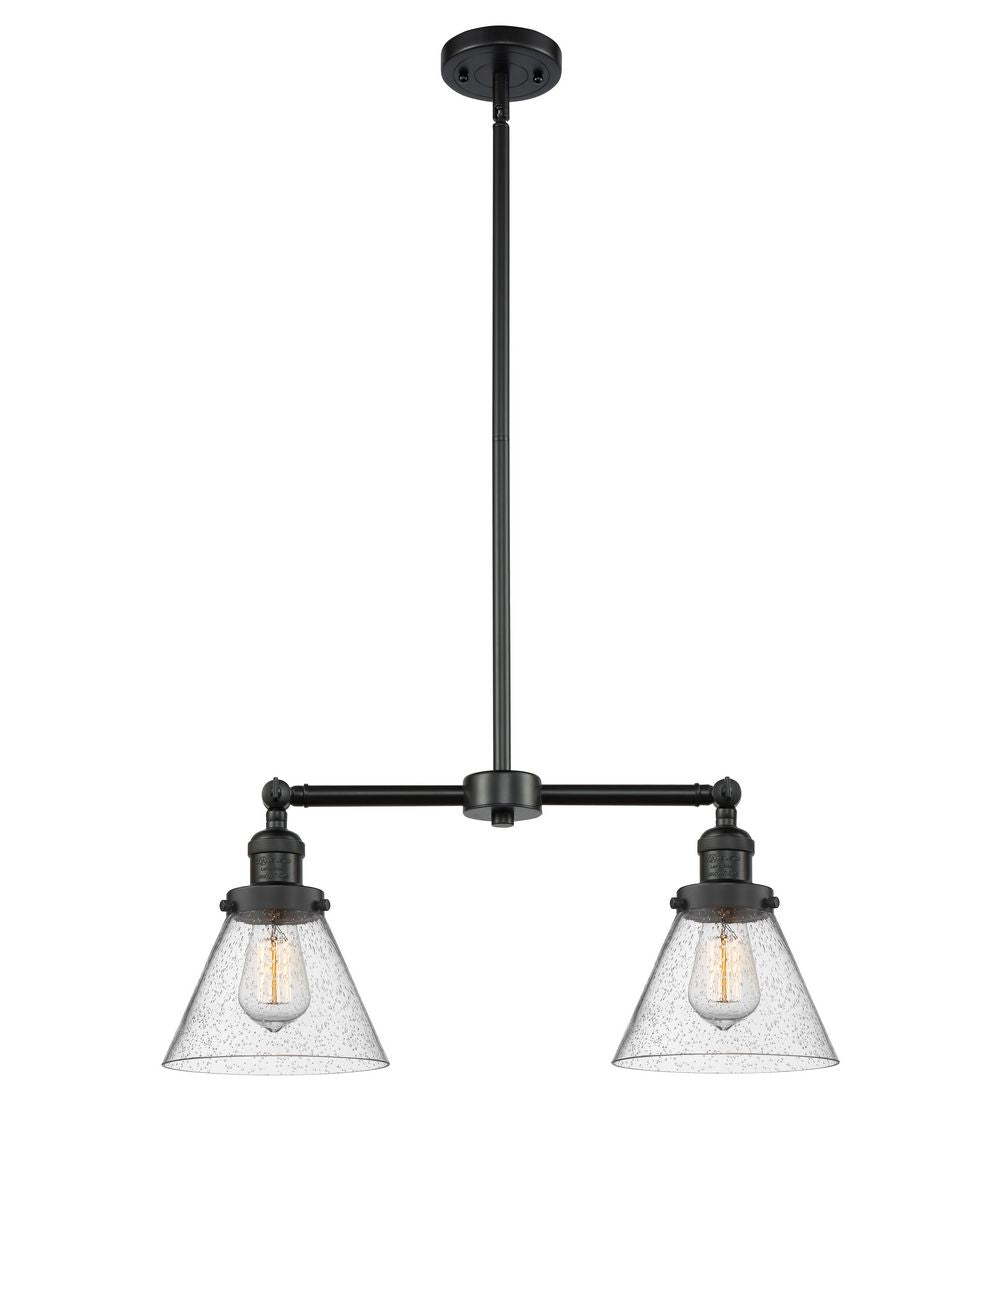 209-BK-G44 2-Light 21" Matte Black Island Light - Seedy Large Cone Glass - LED Bulb - Dimmensions: 21 x 5 x 10<br>Minimum Height : 21.125<br>Maximum Height : 45.125 - Sloped Ceiling Compatible: Yes